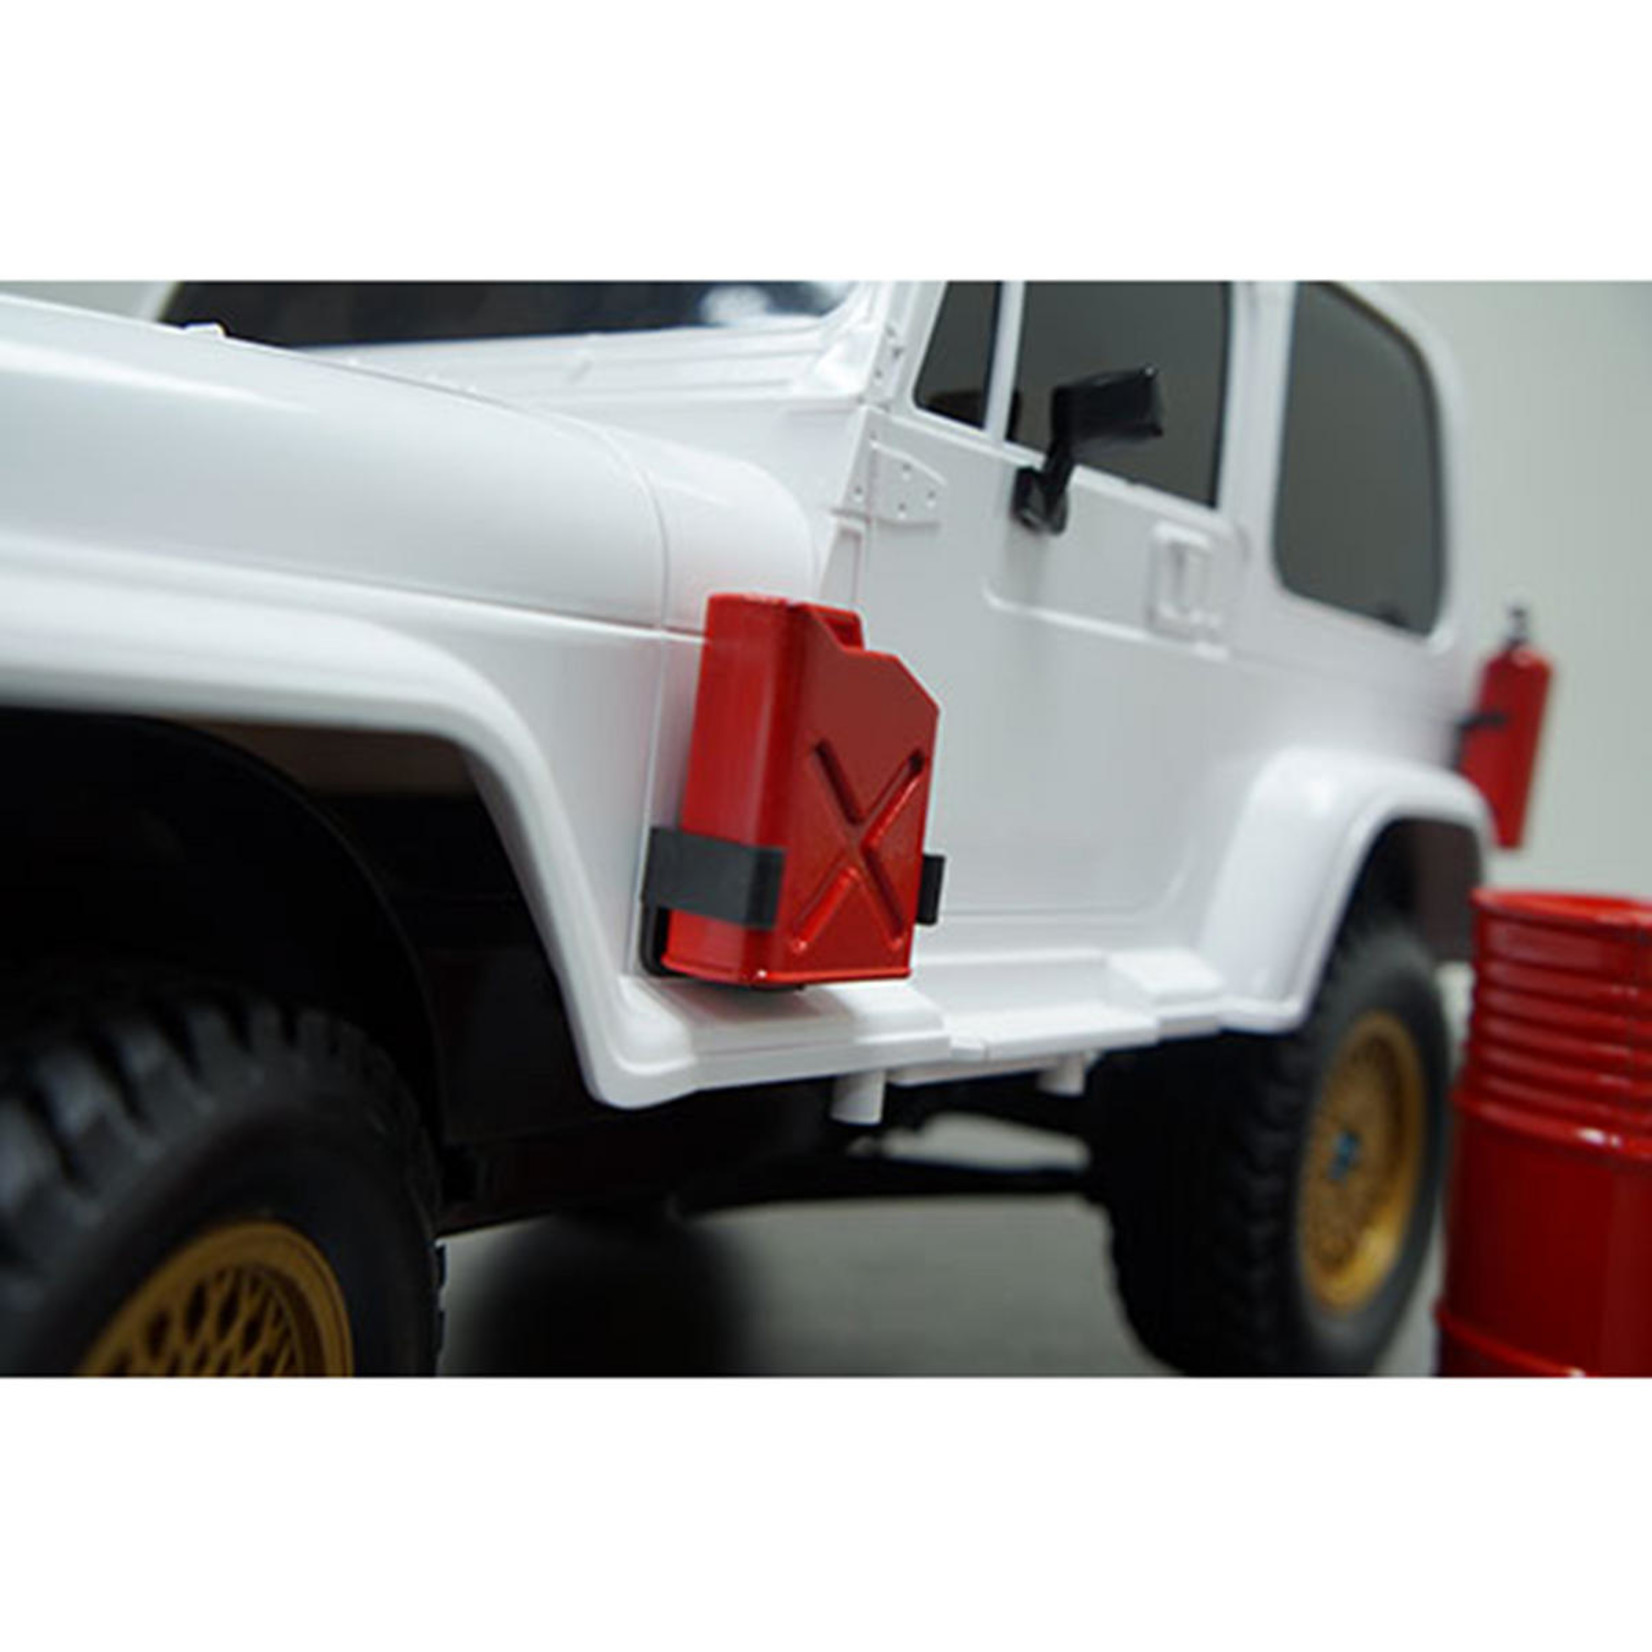 Yeah Racing YEA-YA-0355 Yeah Racing 1/10 Crawler Scale "Jerry Can" Accessory Set (Fuel Cans) (Red)